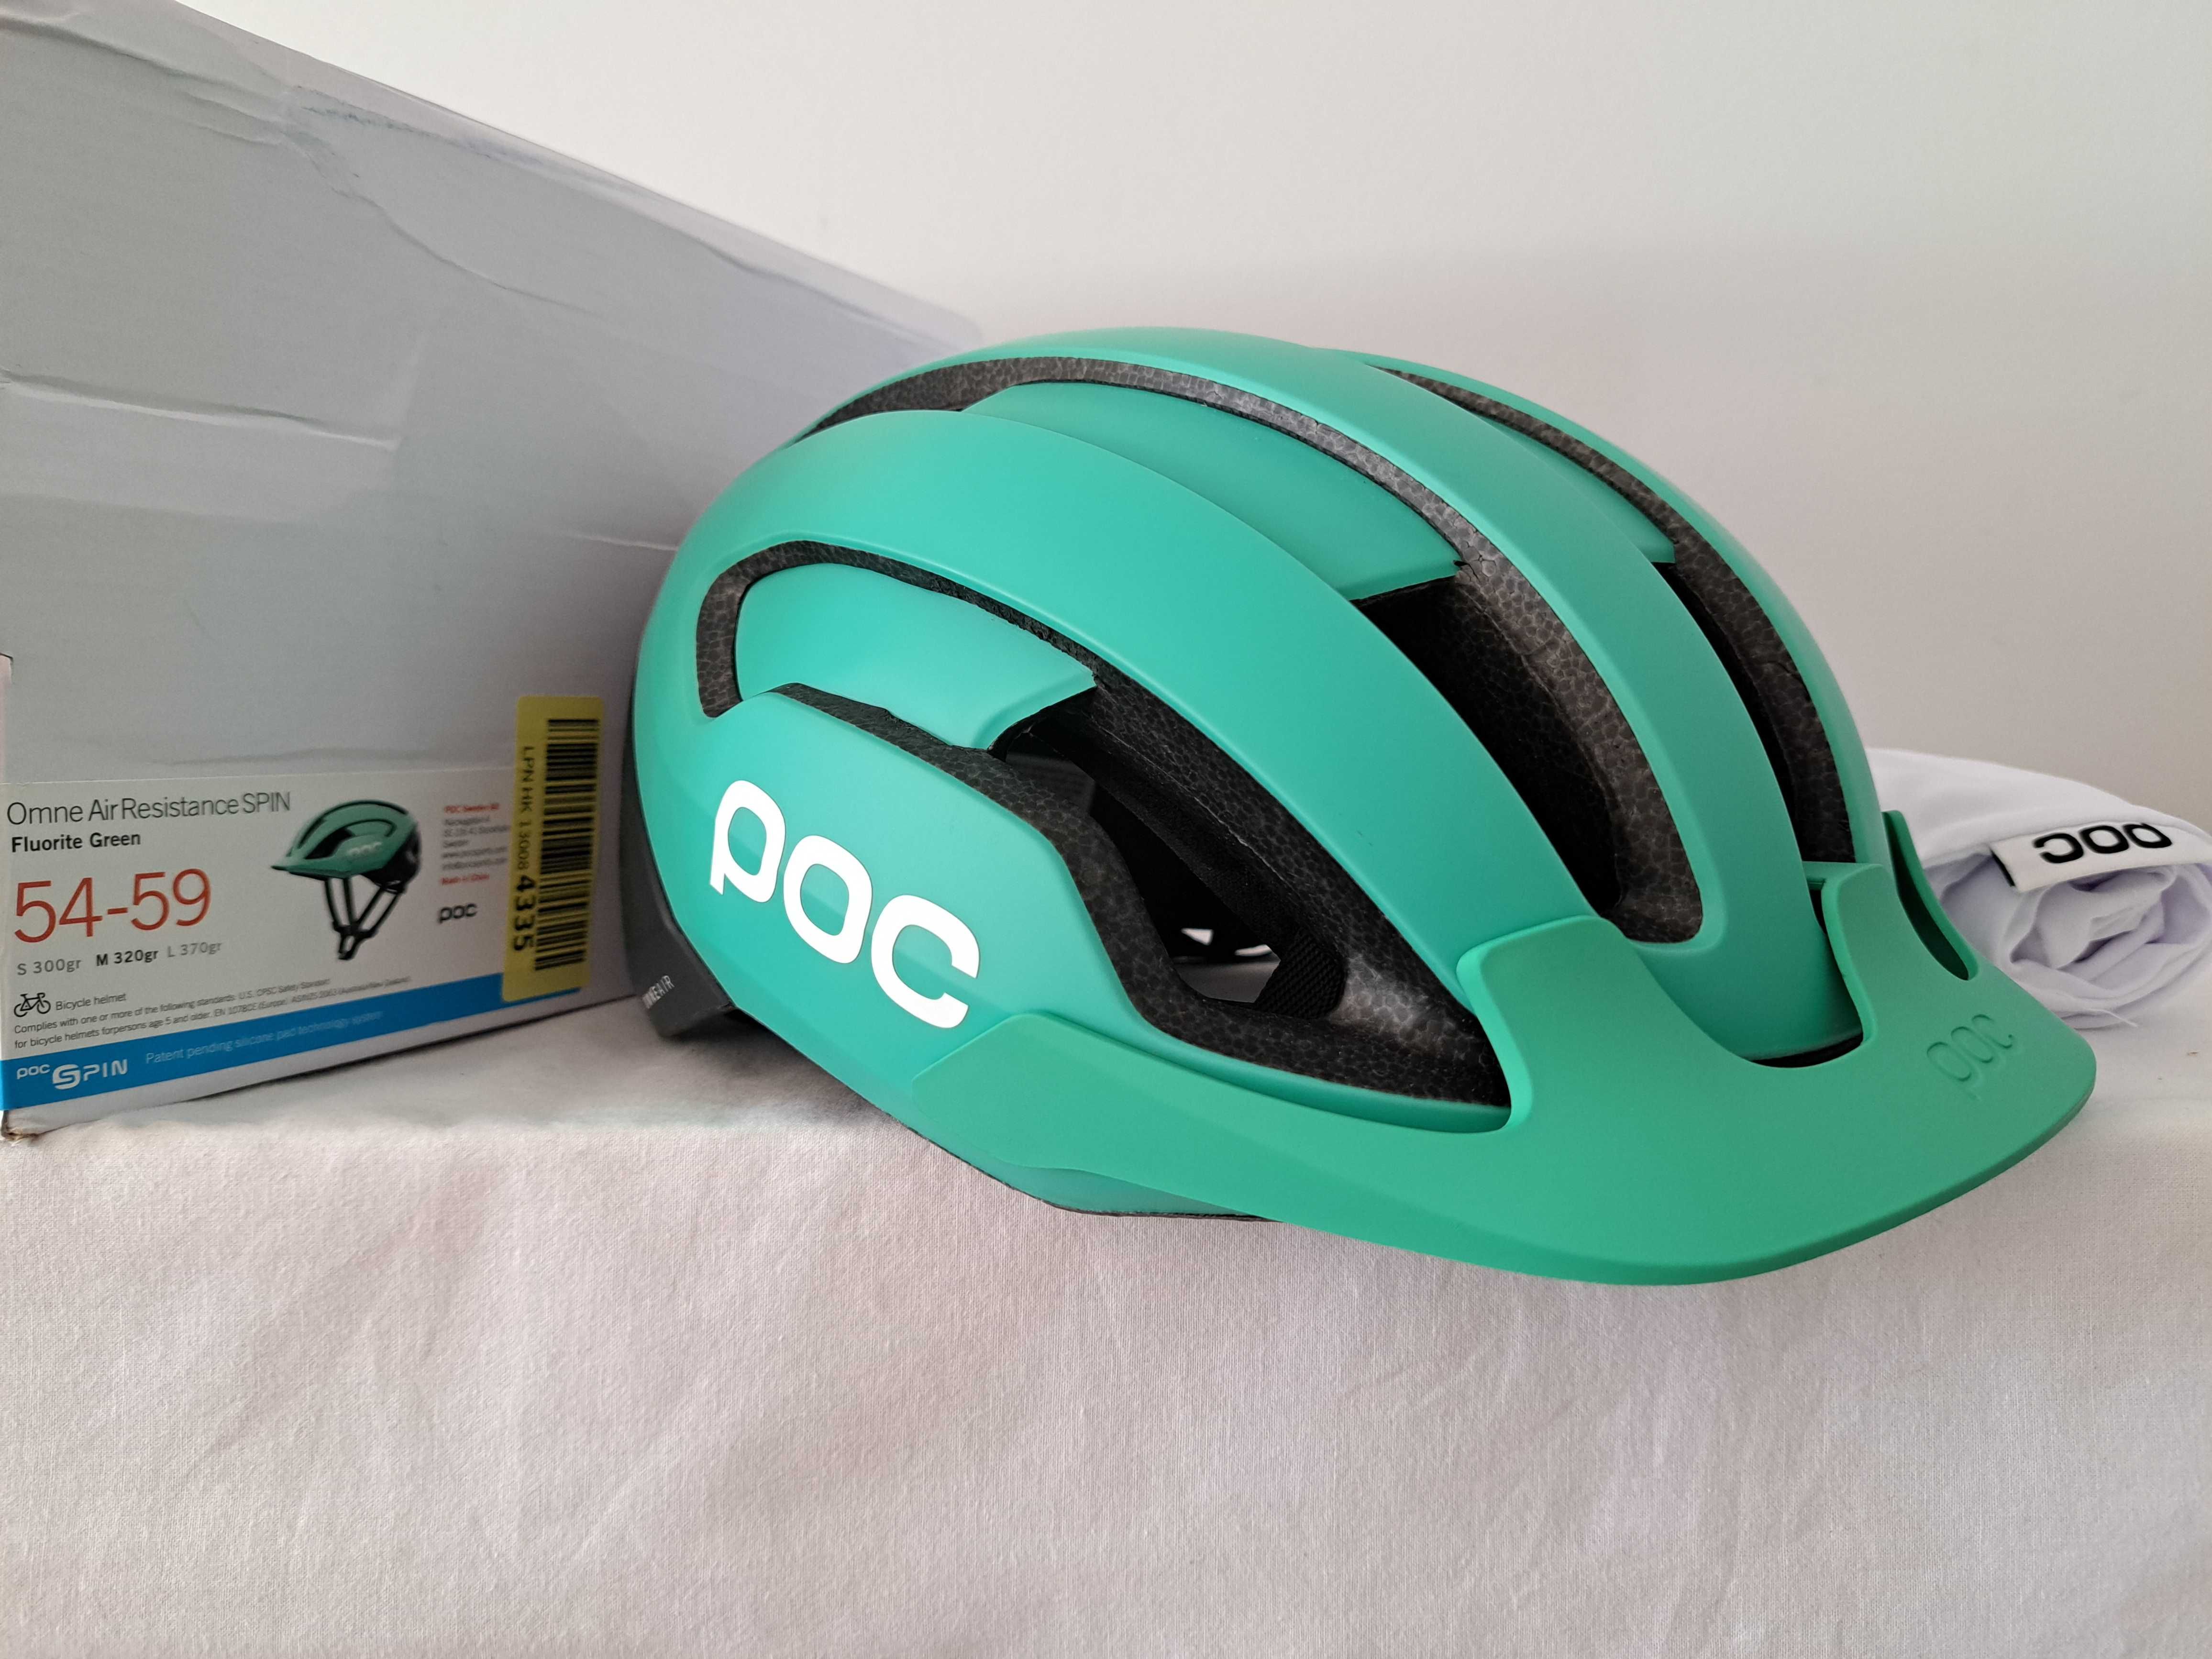 Kask rowerowy Poc Omne Air Resistance Spin Fluorite Green M 54-59cm